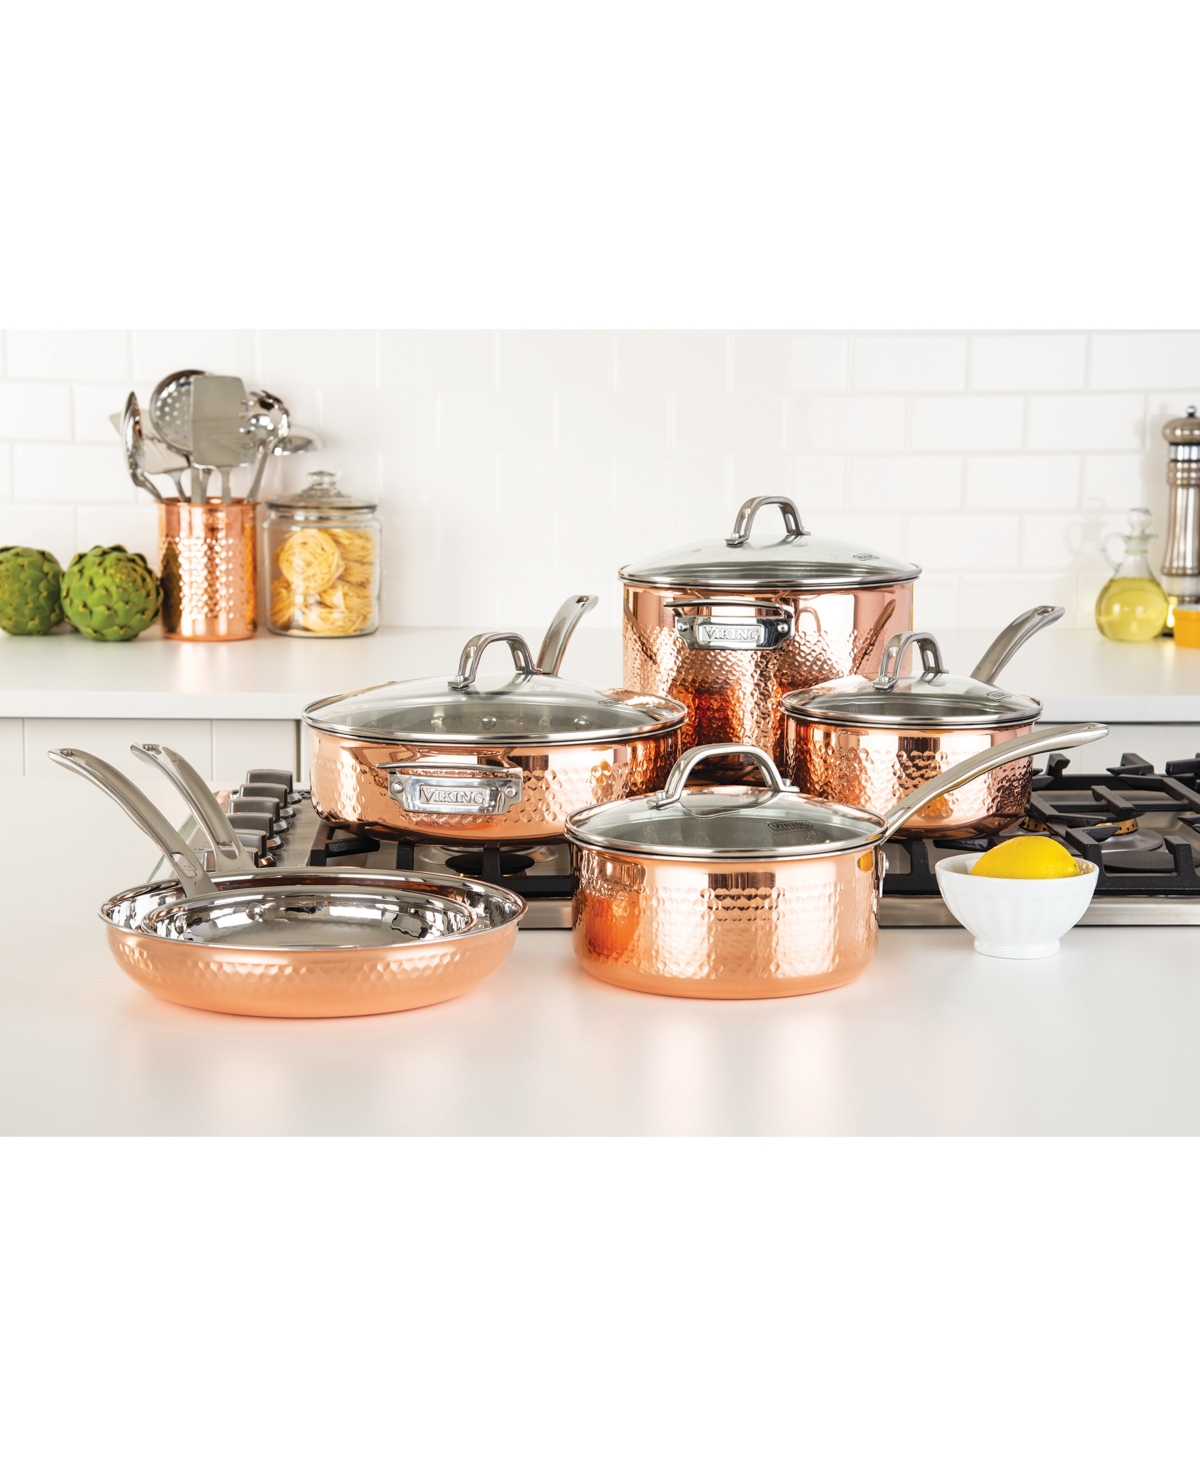 Viking 3-Ply Hammered Copper Clad 10 Piece Cookware Set